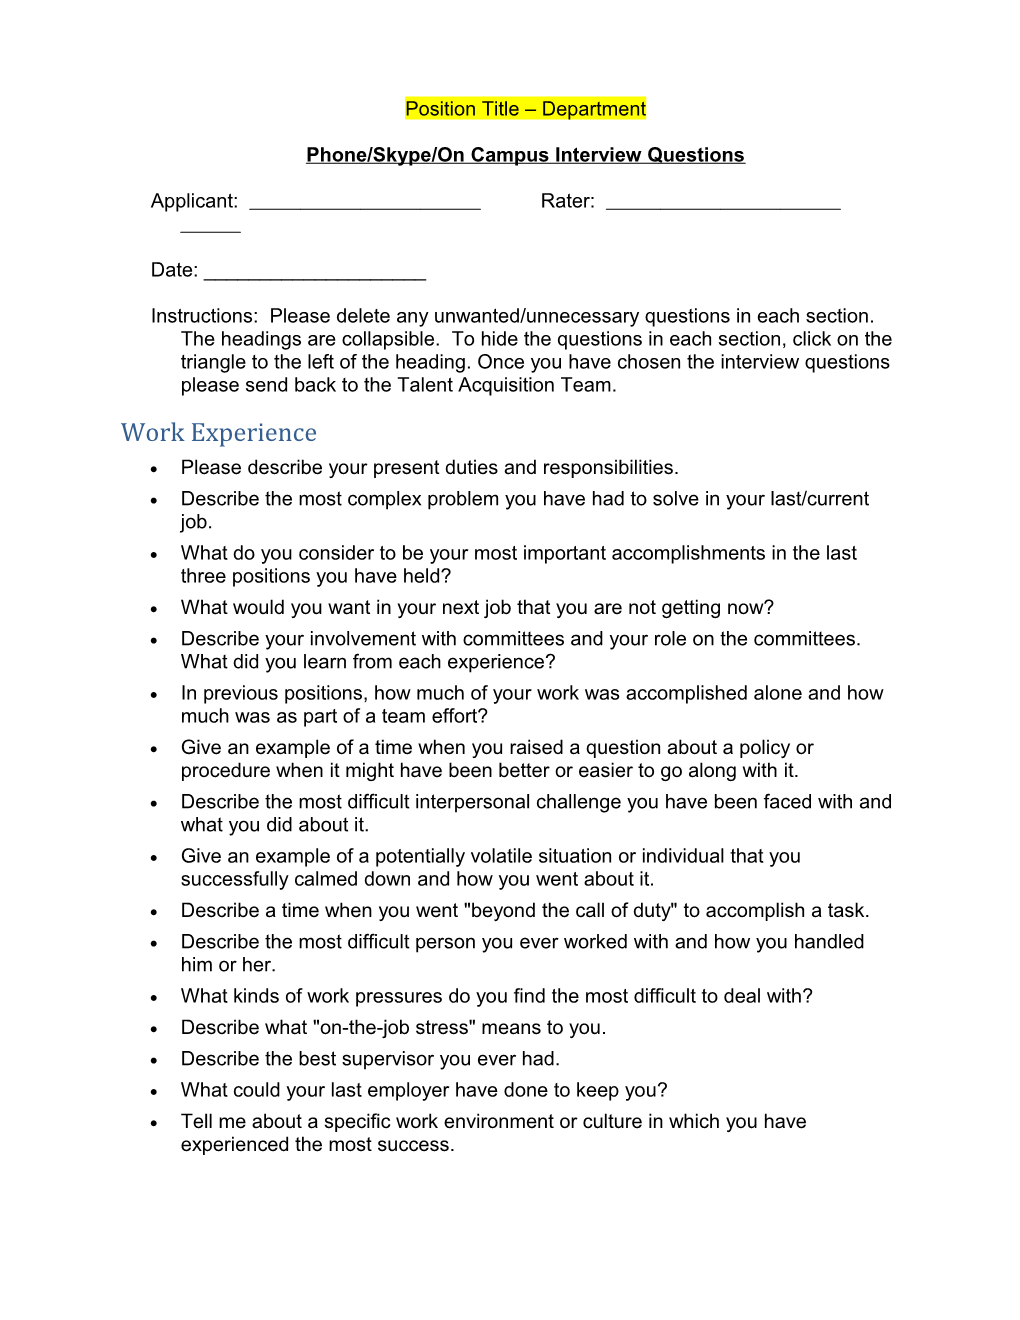 Phone/Skype/On Campus Interview Questions